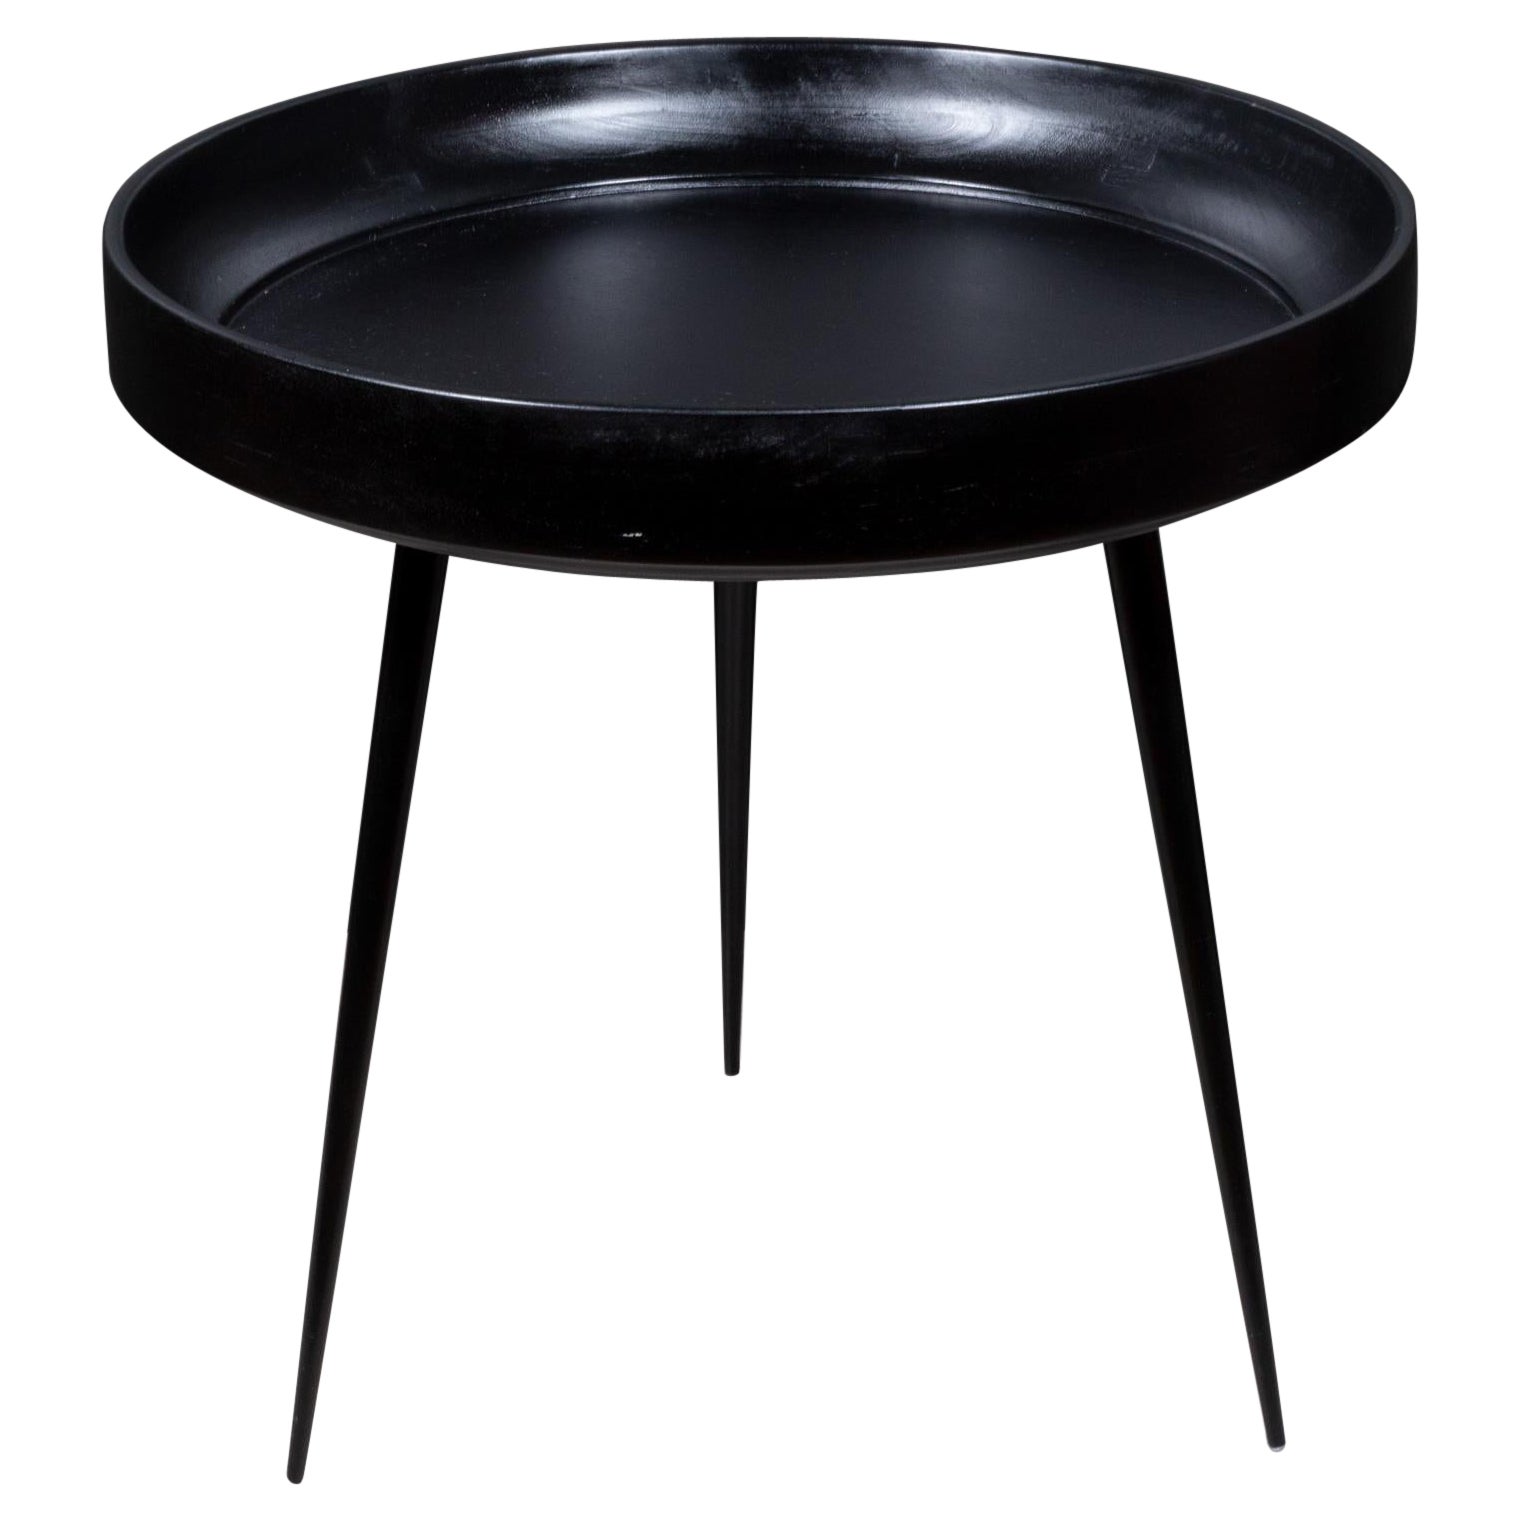 Medium Bowl Side Table in Black by Mater